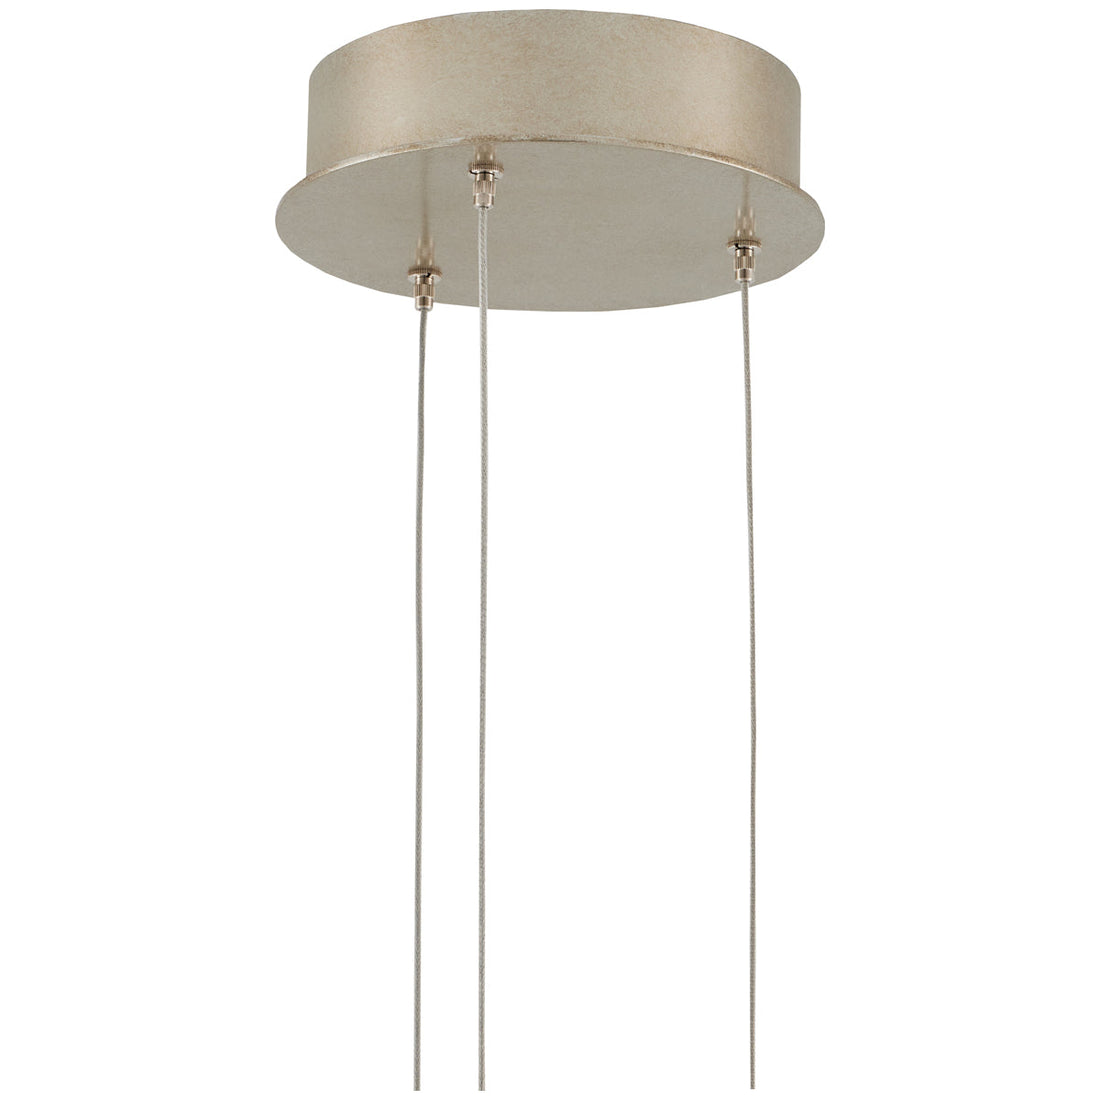 Currey and Company Beehive 3-Light Multi-Drop Pendant